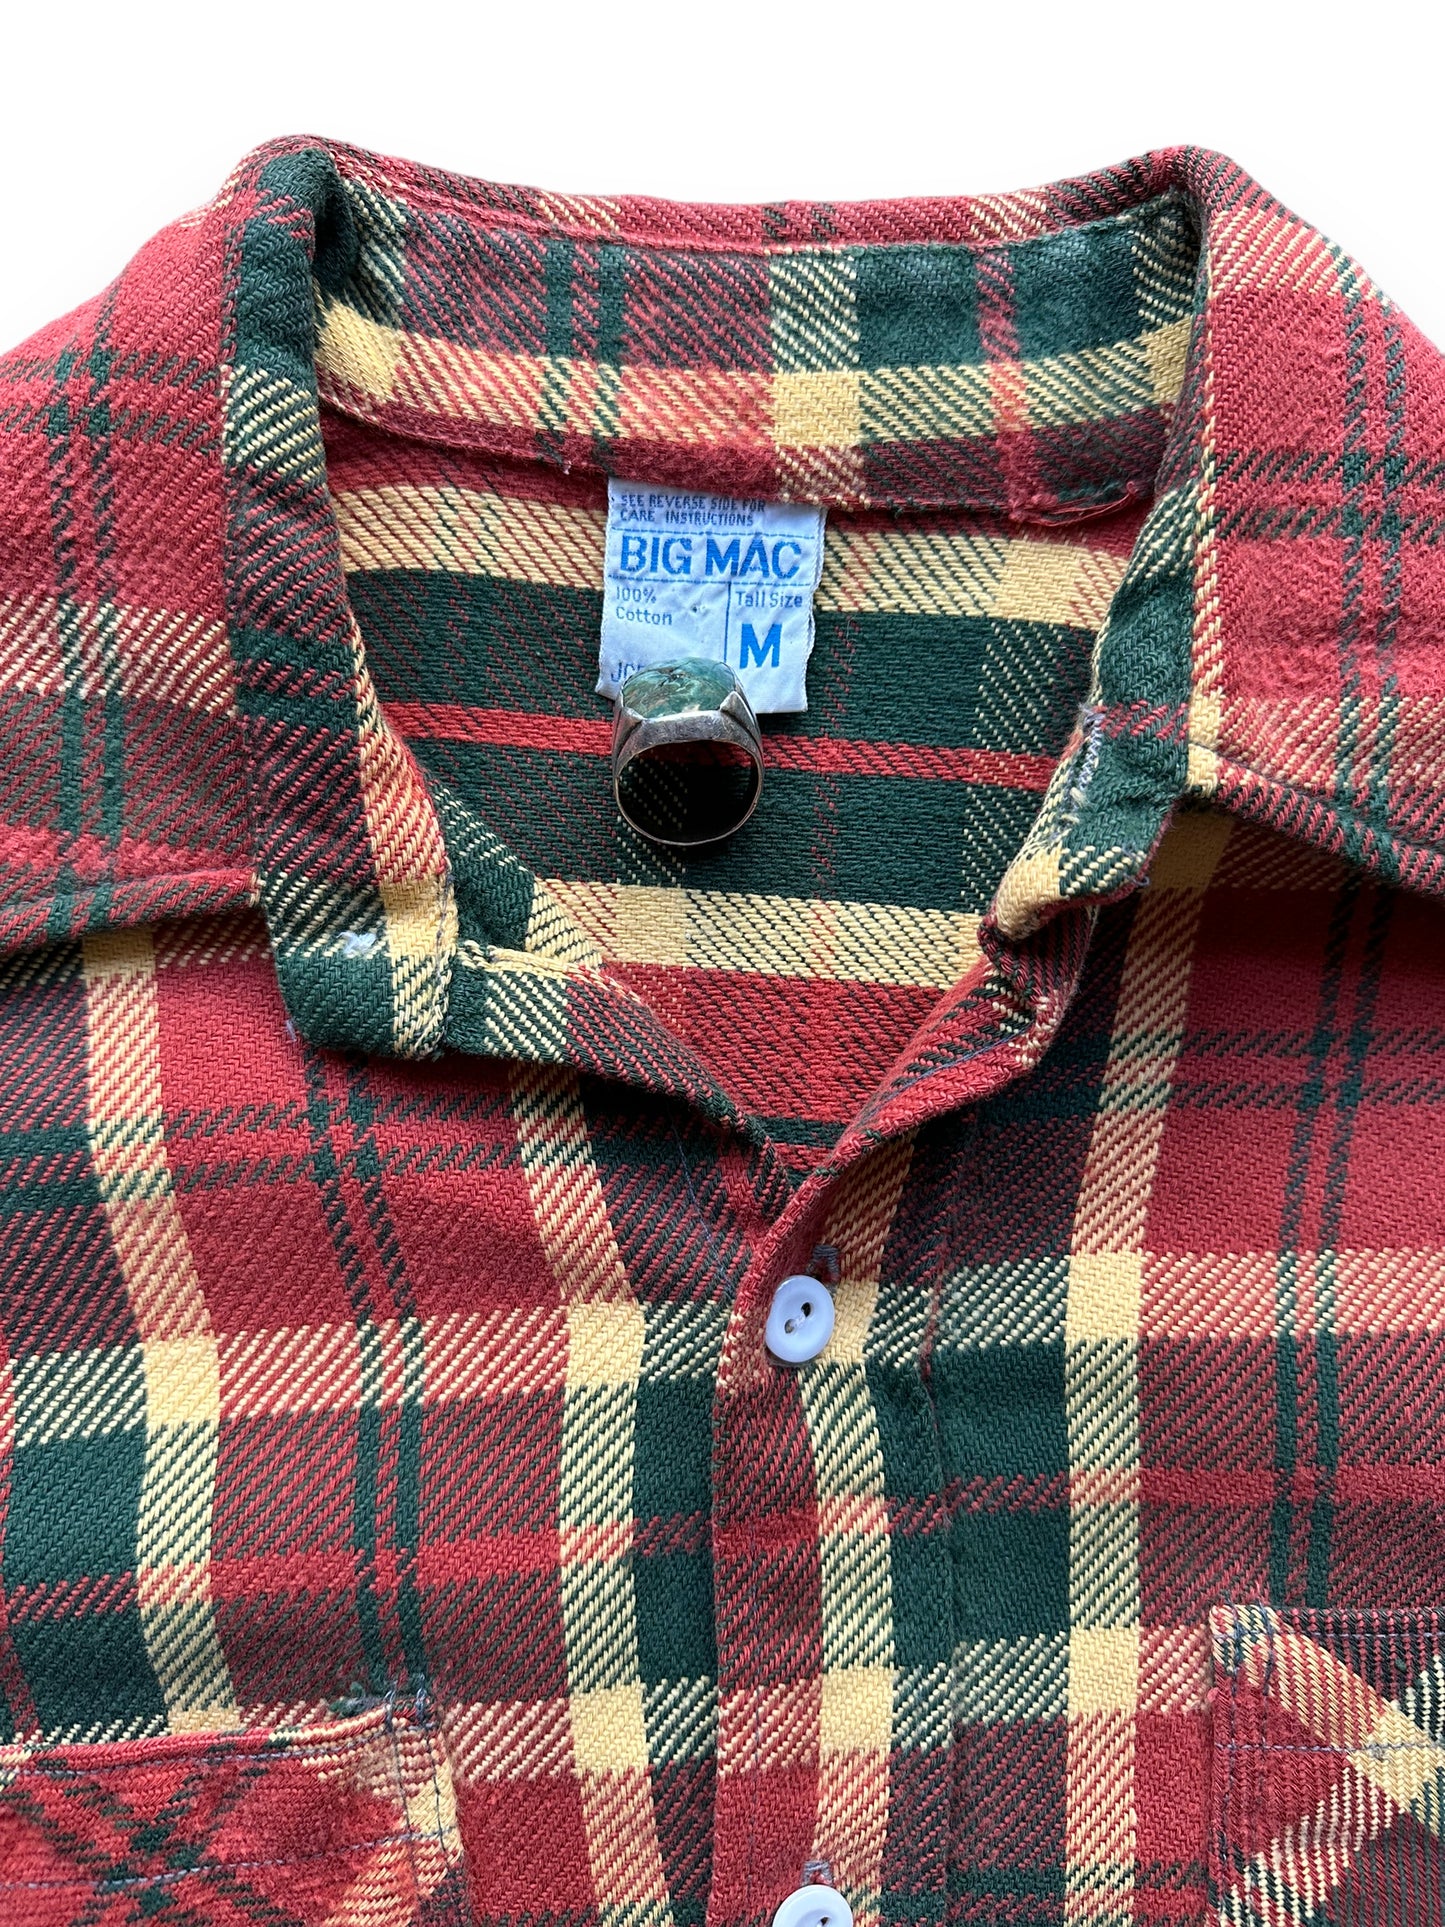 Tag View of Vintage Red & Green Big Mac Cotton Flannel SZ M Tall | Vintage Cotton Flannel Seattle | Barn Owl Vintage Seattle